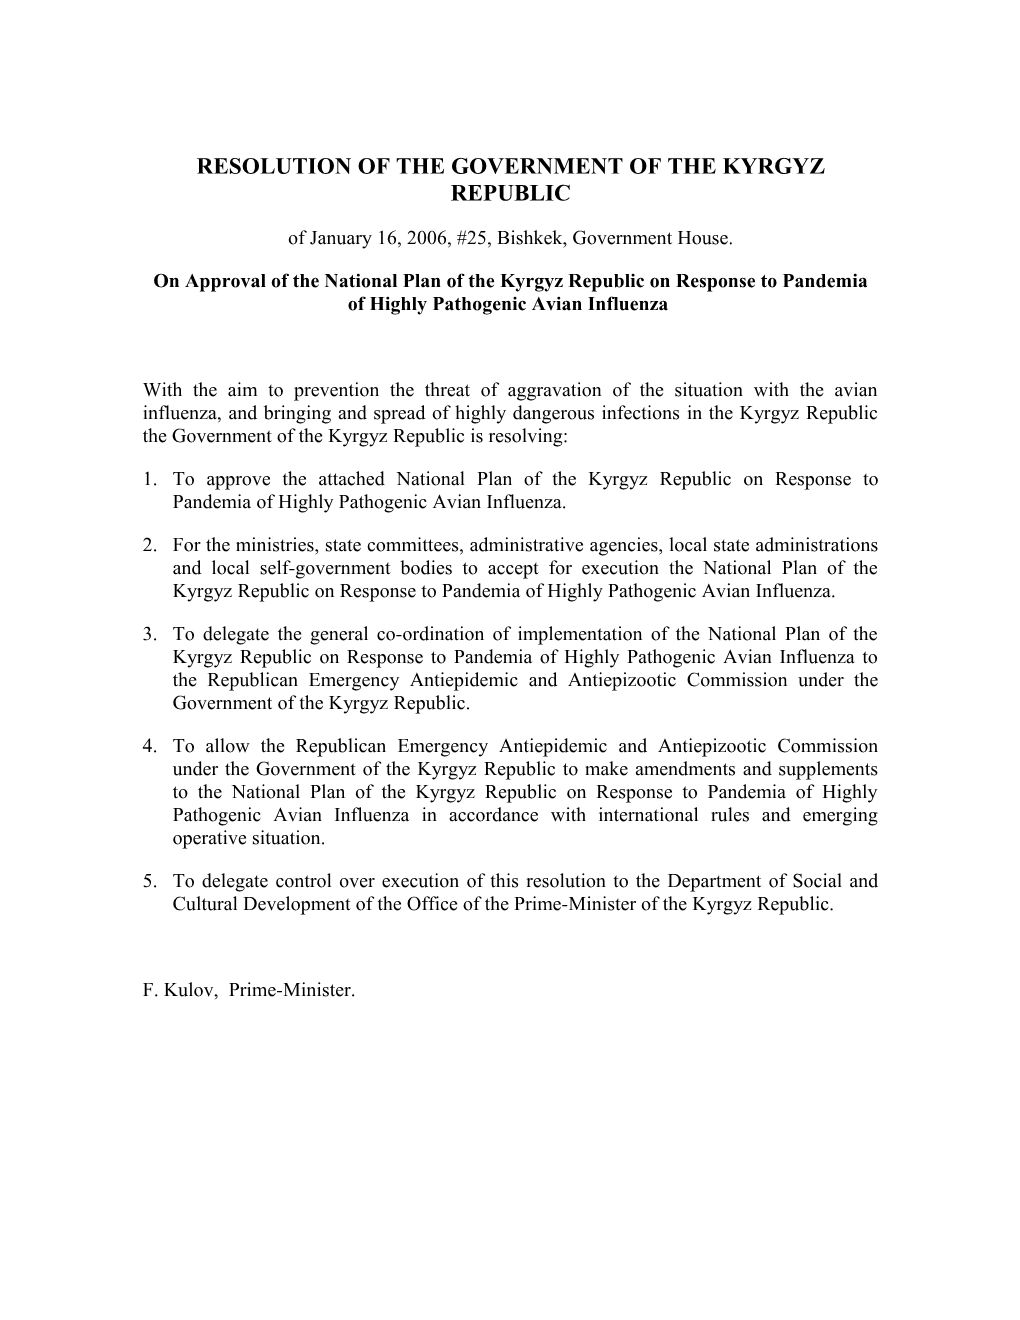 Resolution of the Government of the Kyrgyzrepublic